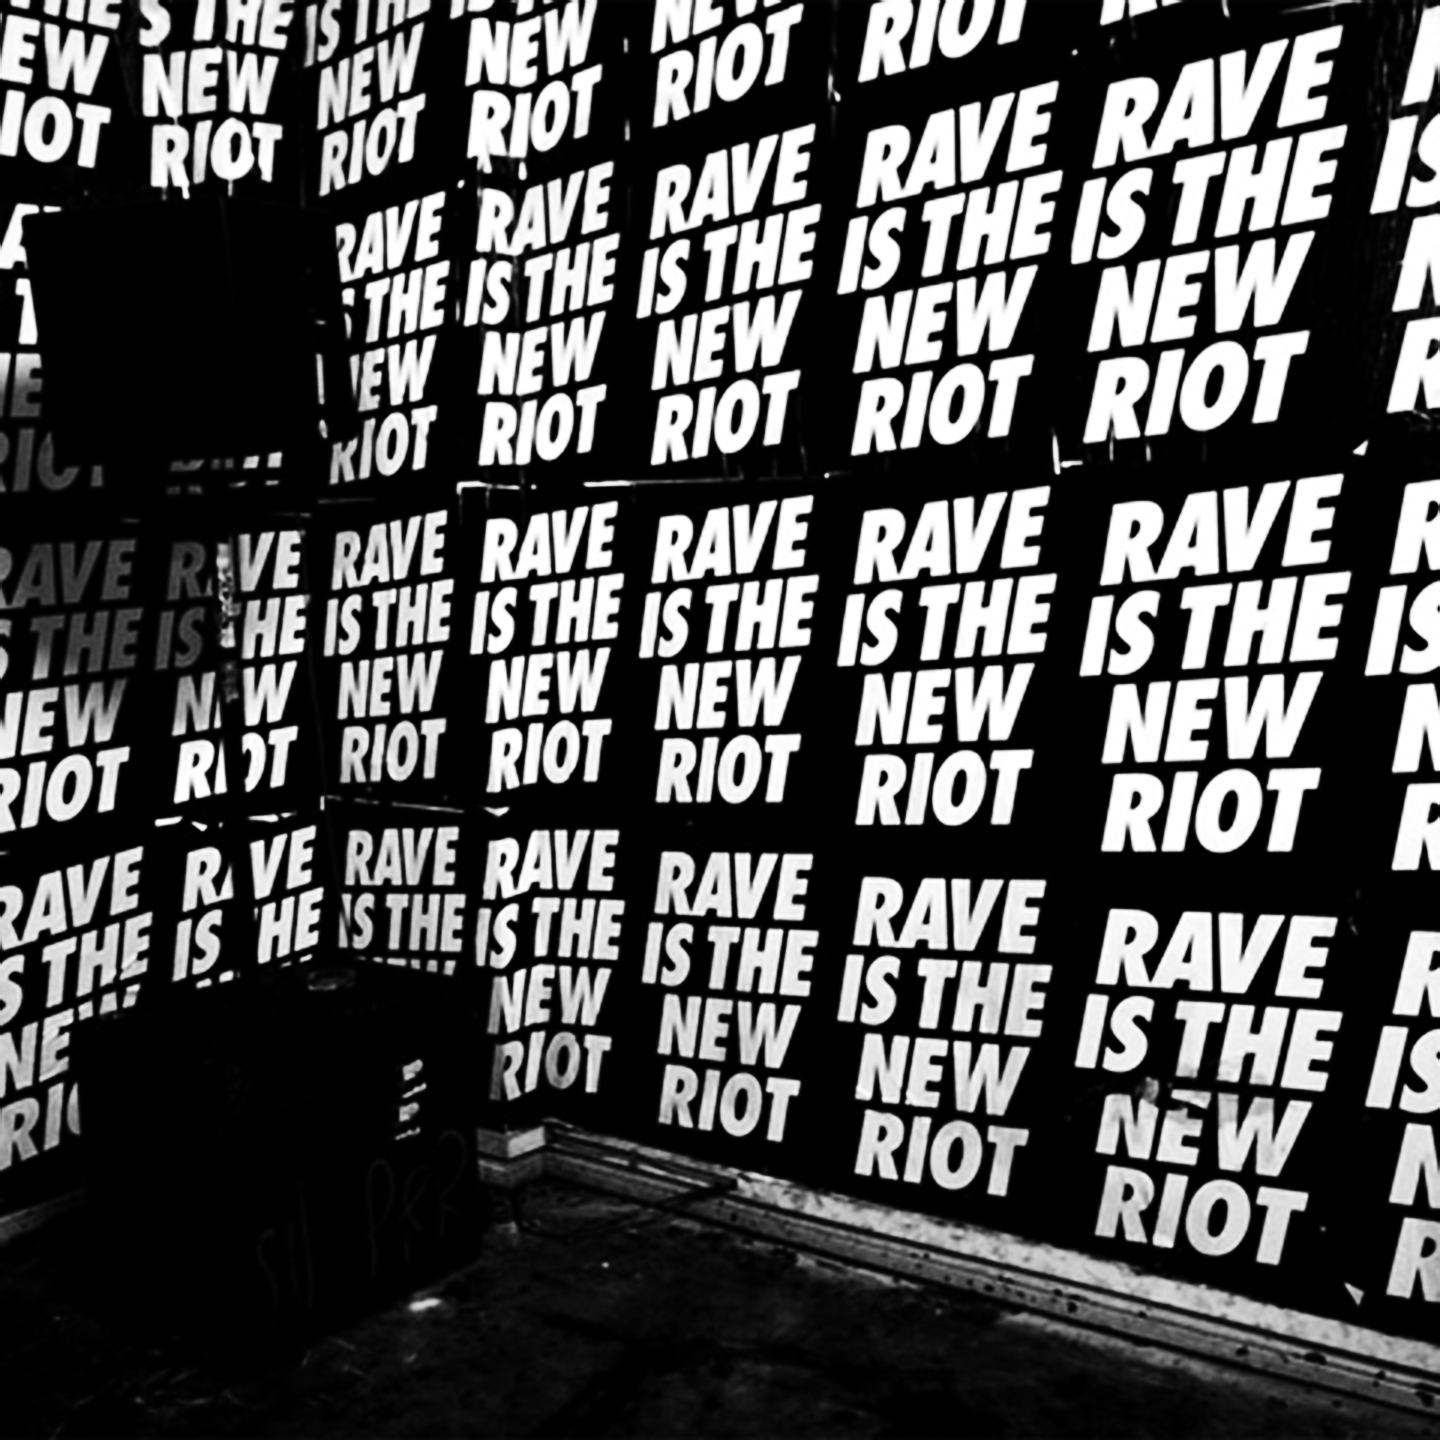 rave_is_the_new_riot1.jpg